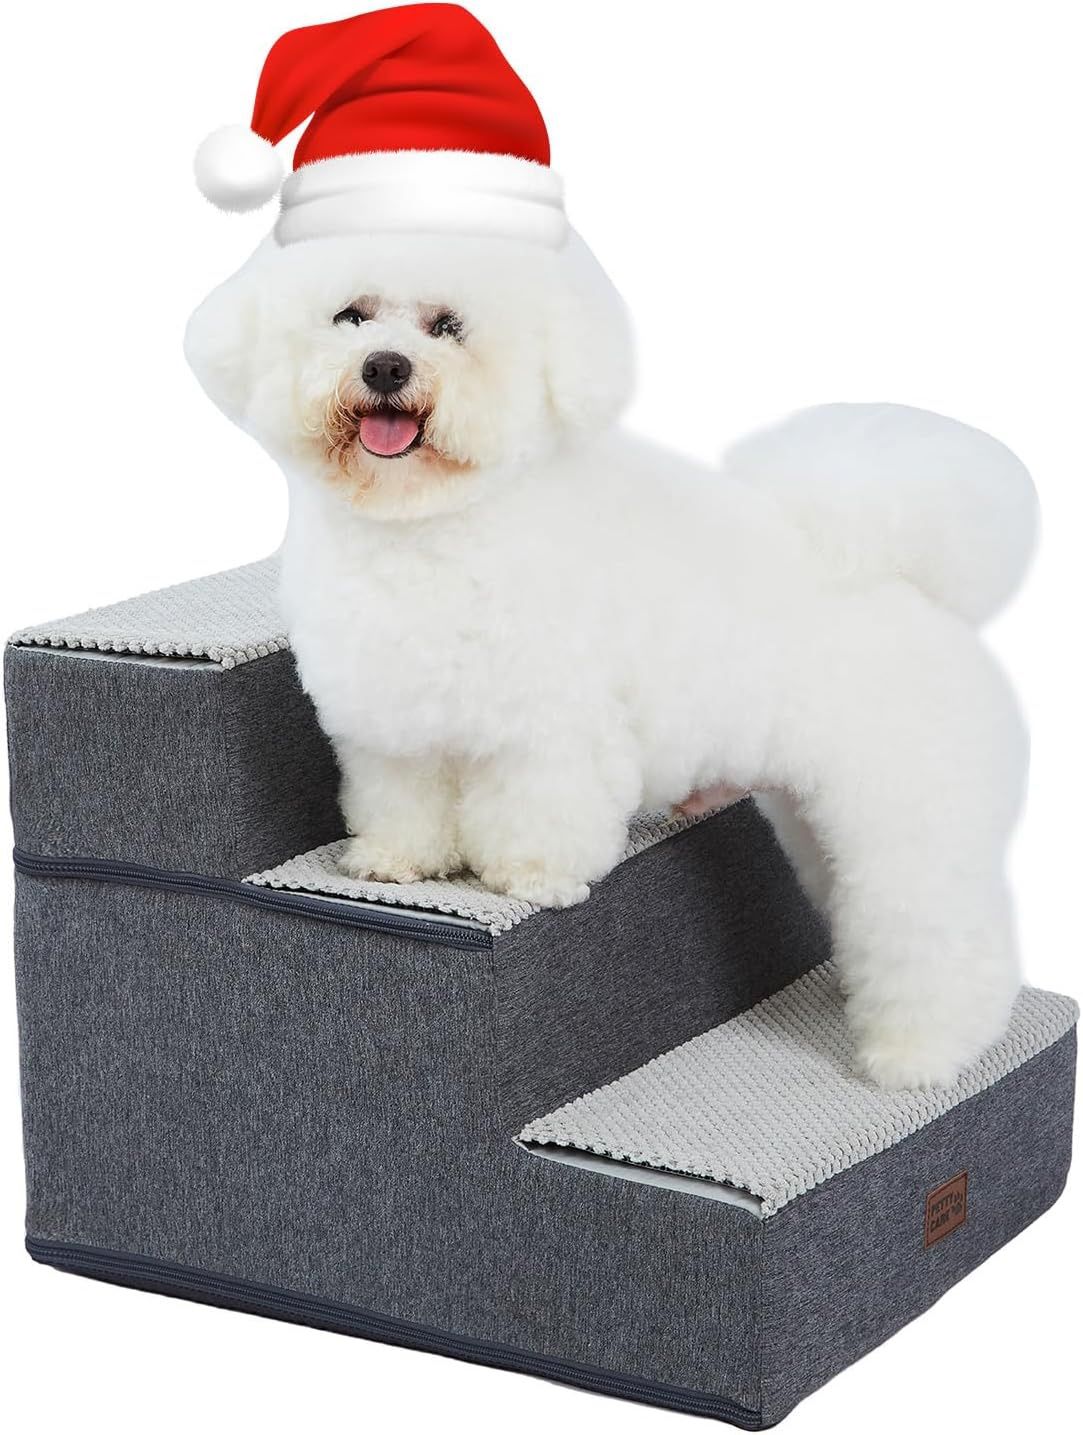 Petty care Dog Stairs for Small Dogs 🐕 